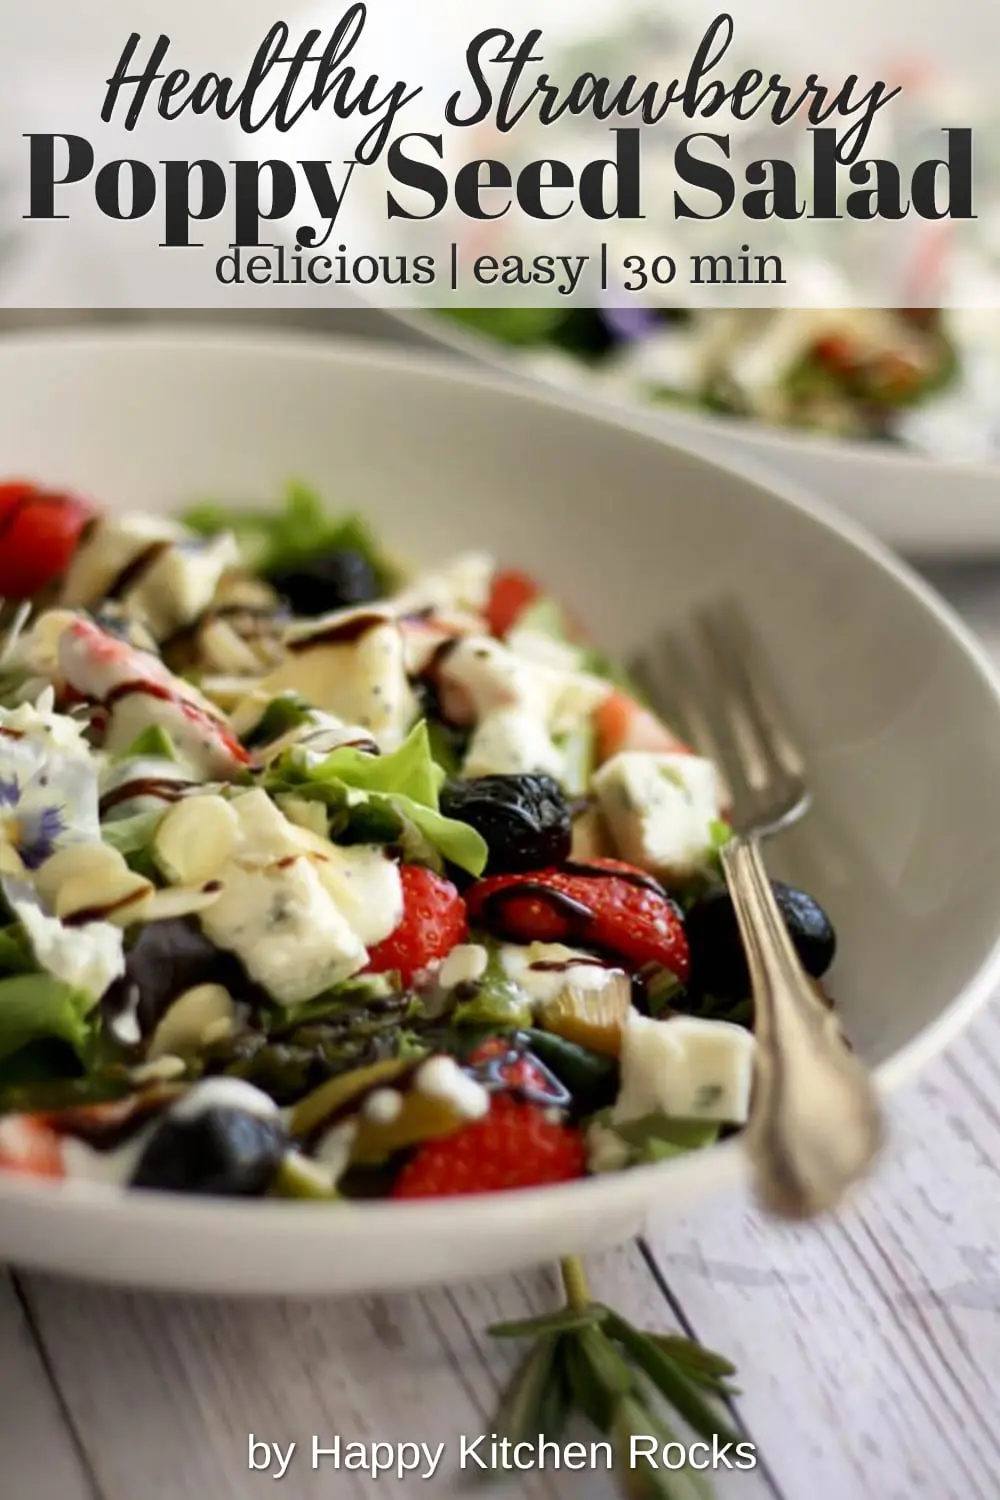 Strawberry Poppy Seed Salad with Asparagus and Rhubarb Collage with Text Overlay